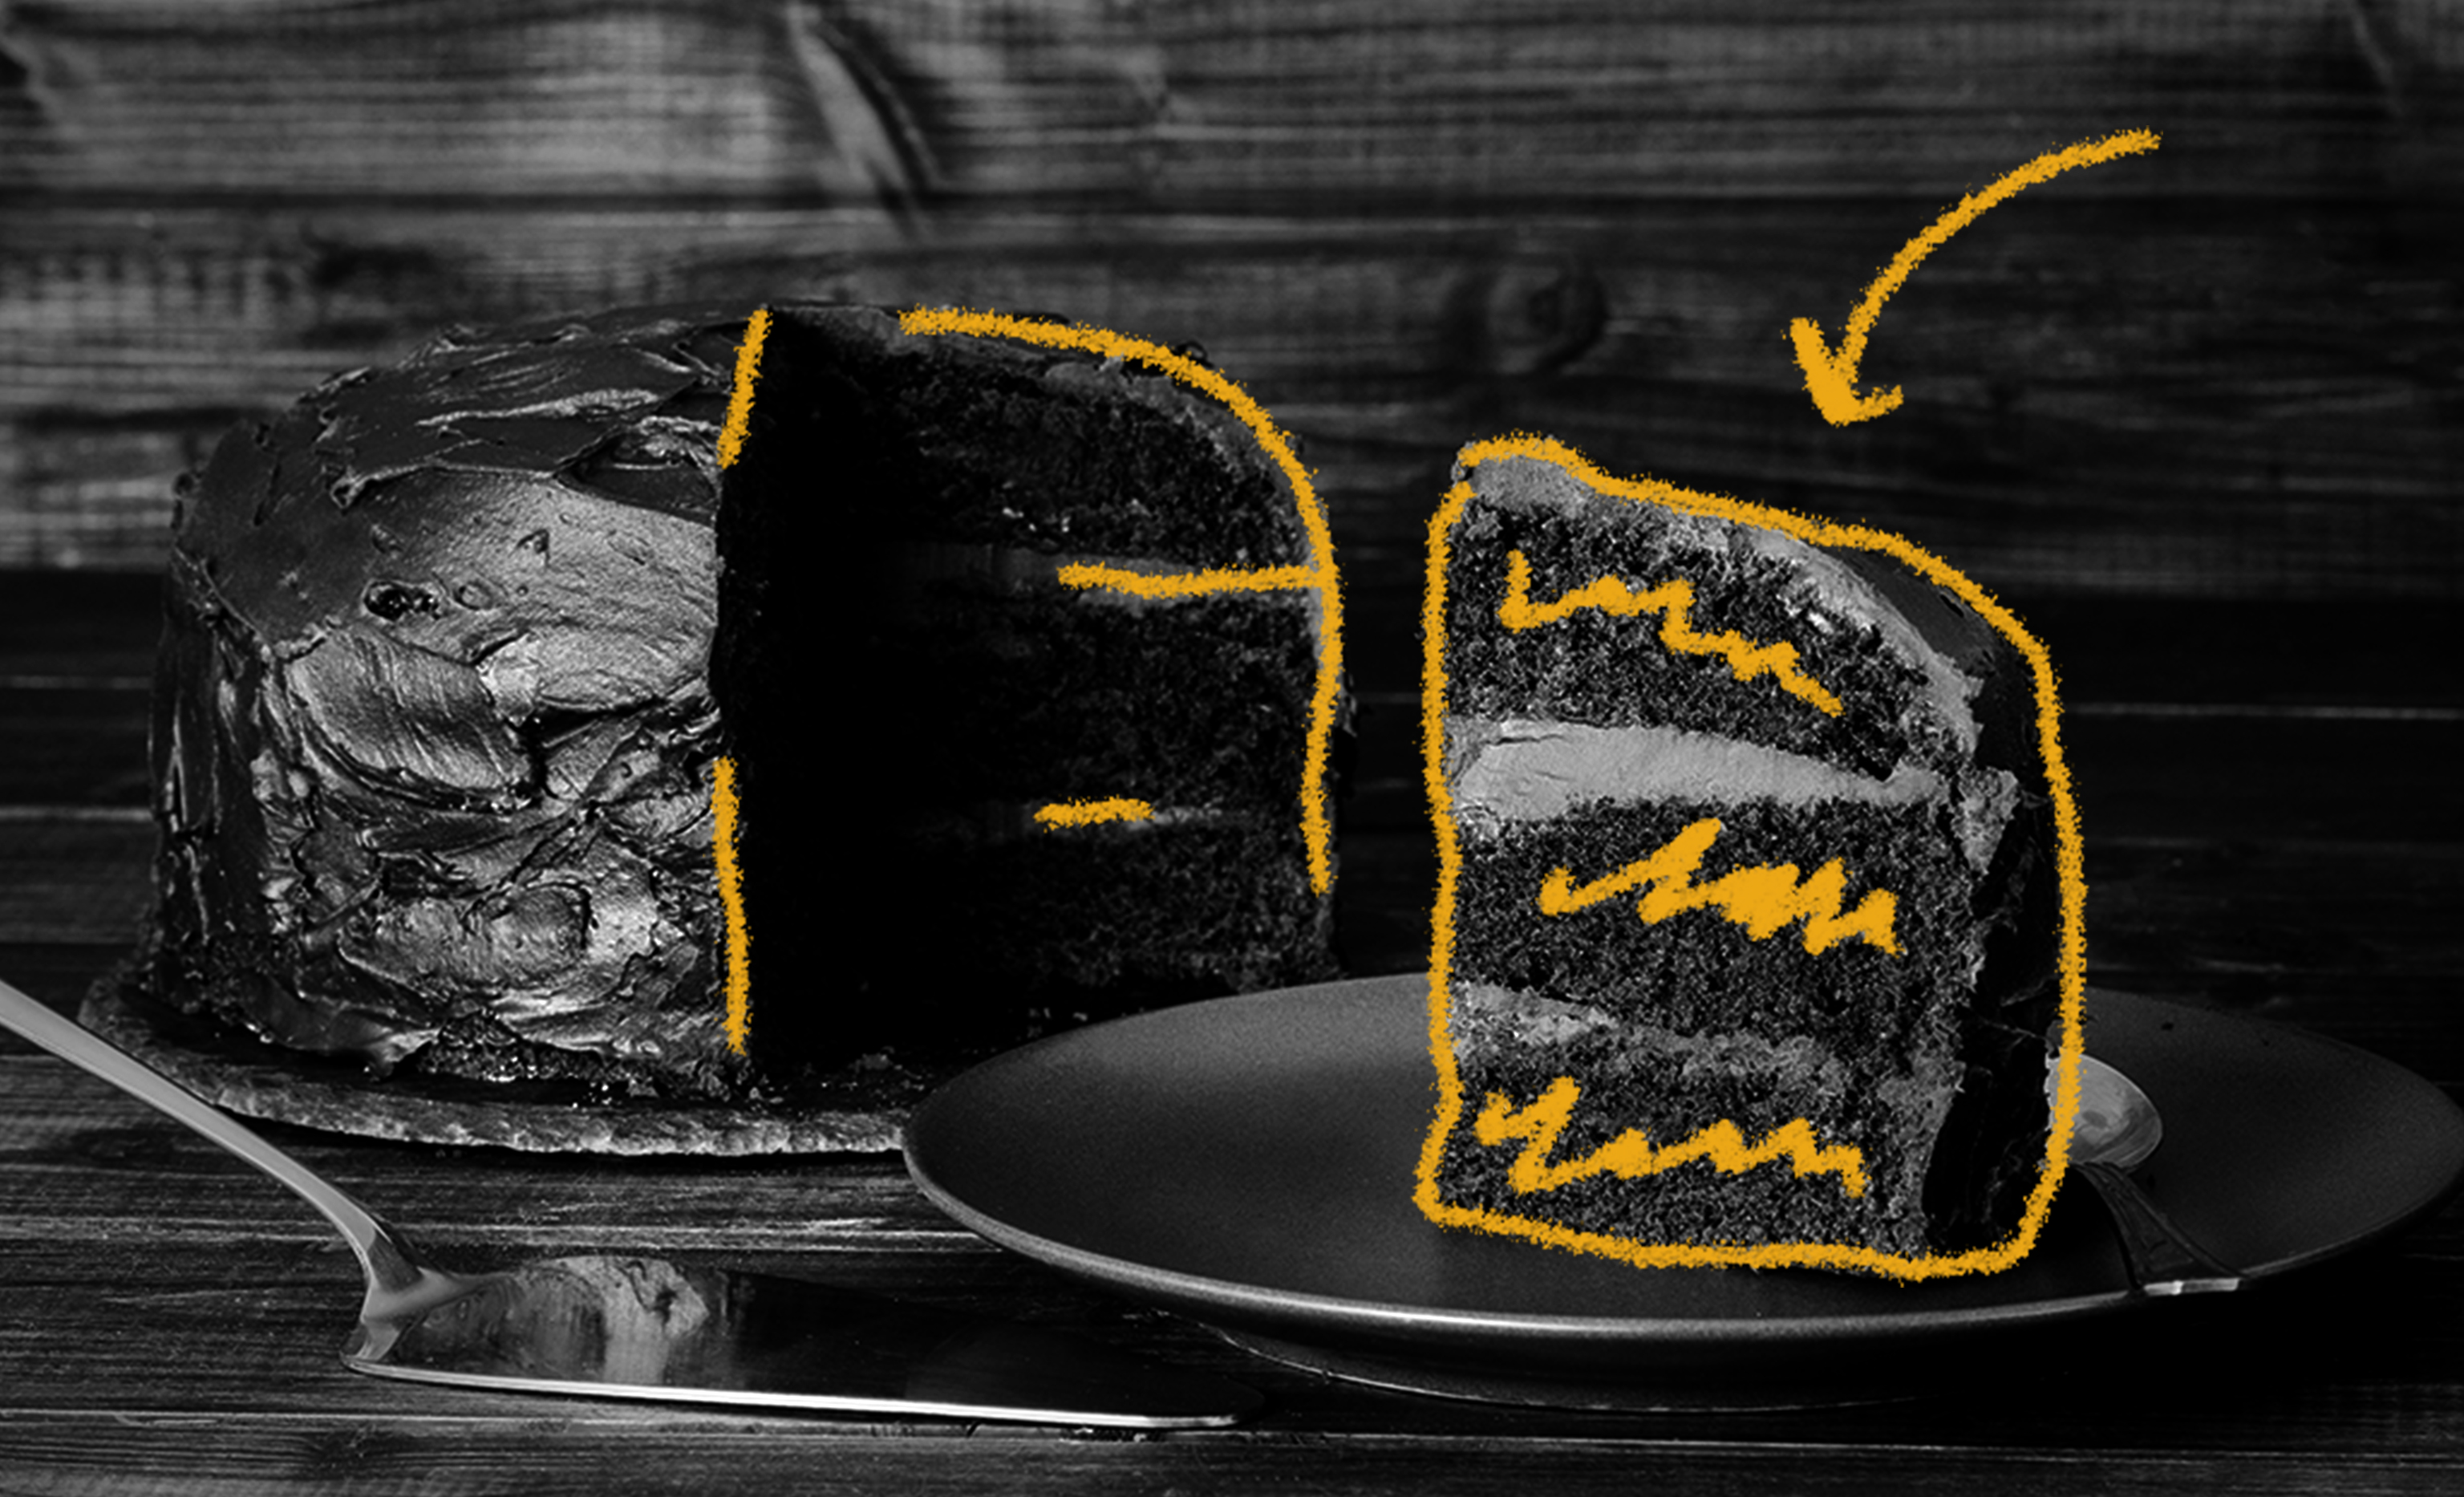 The History of Devil's Food Cake